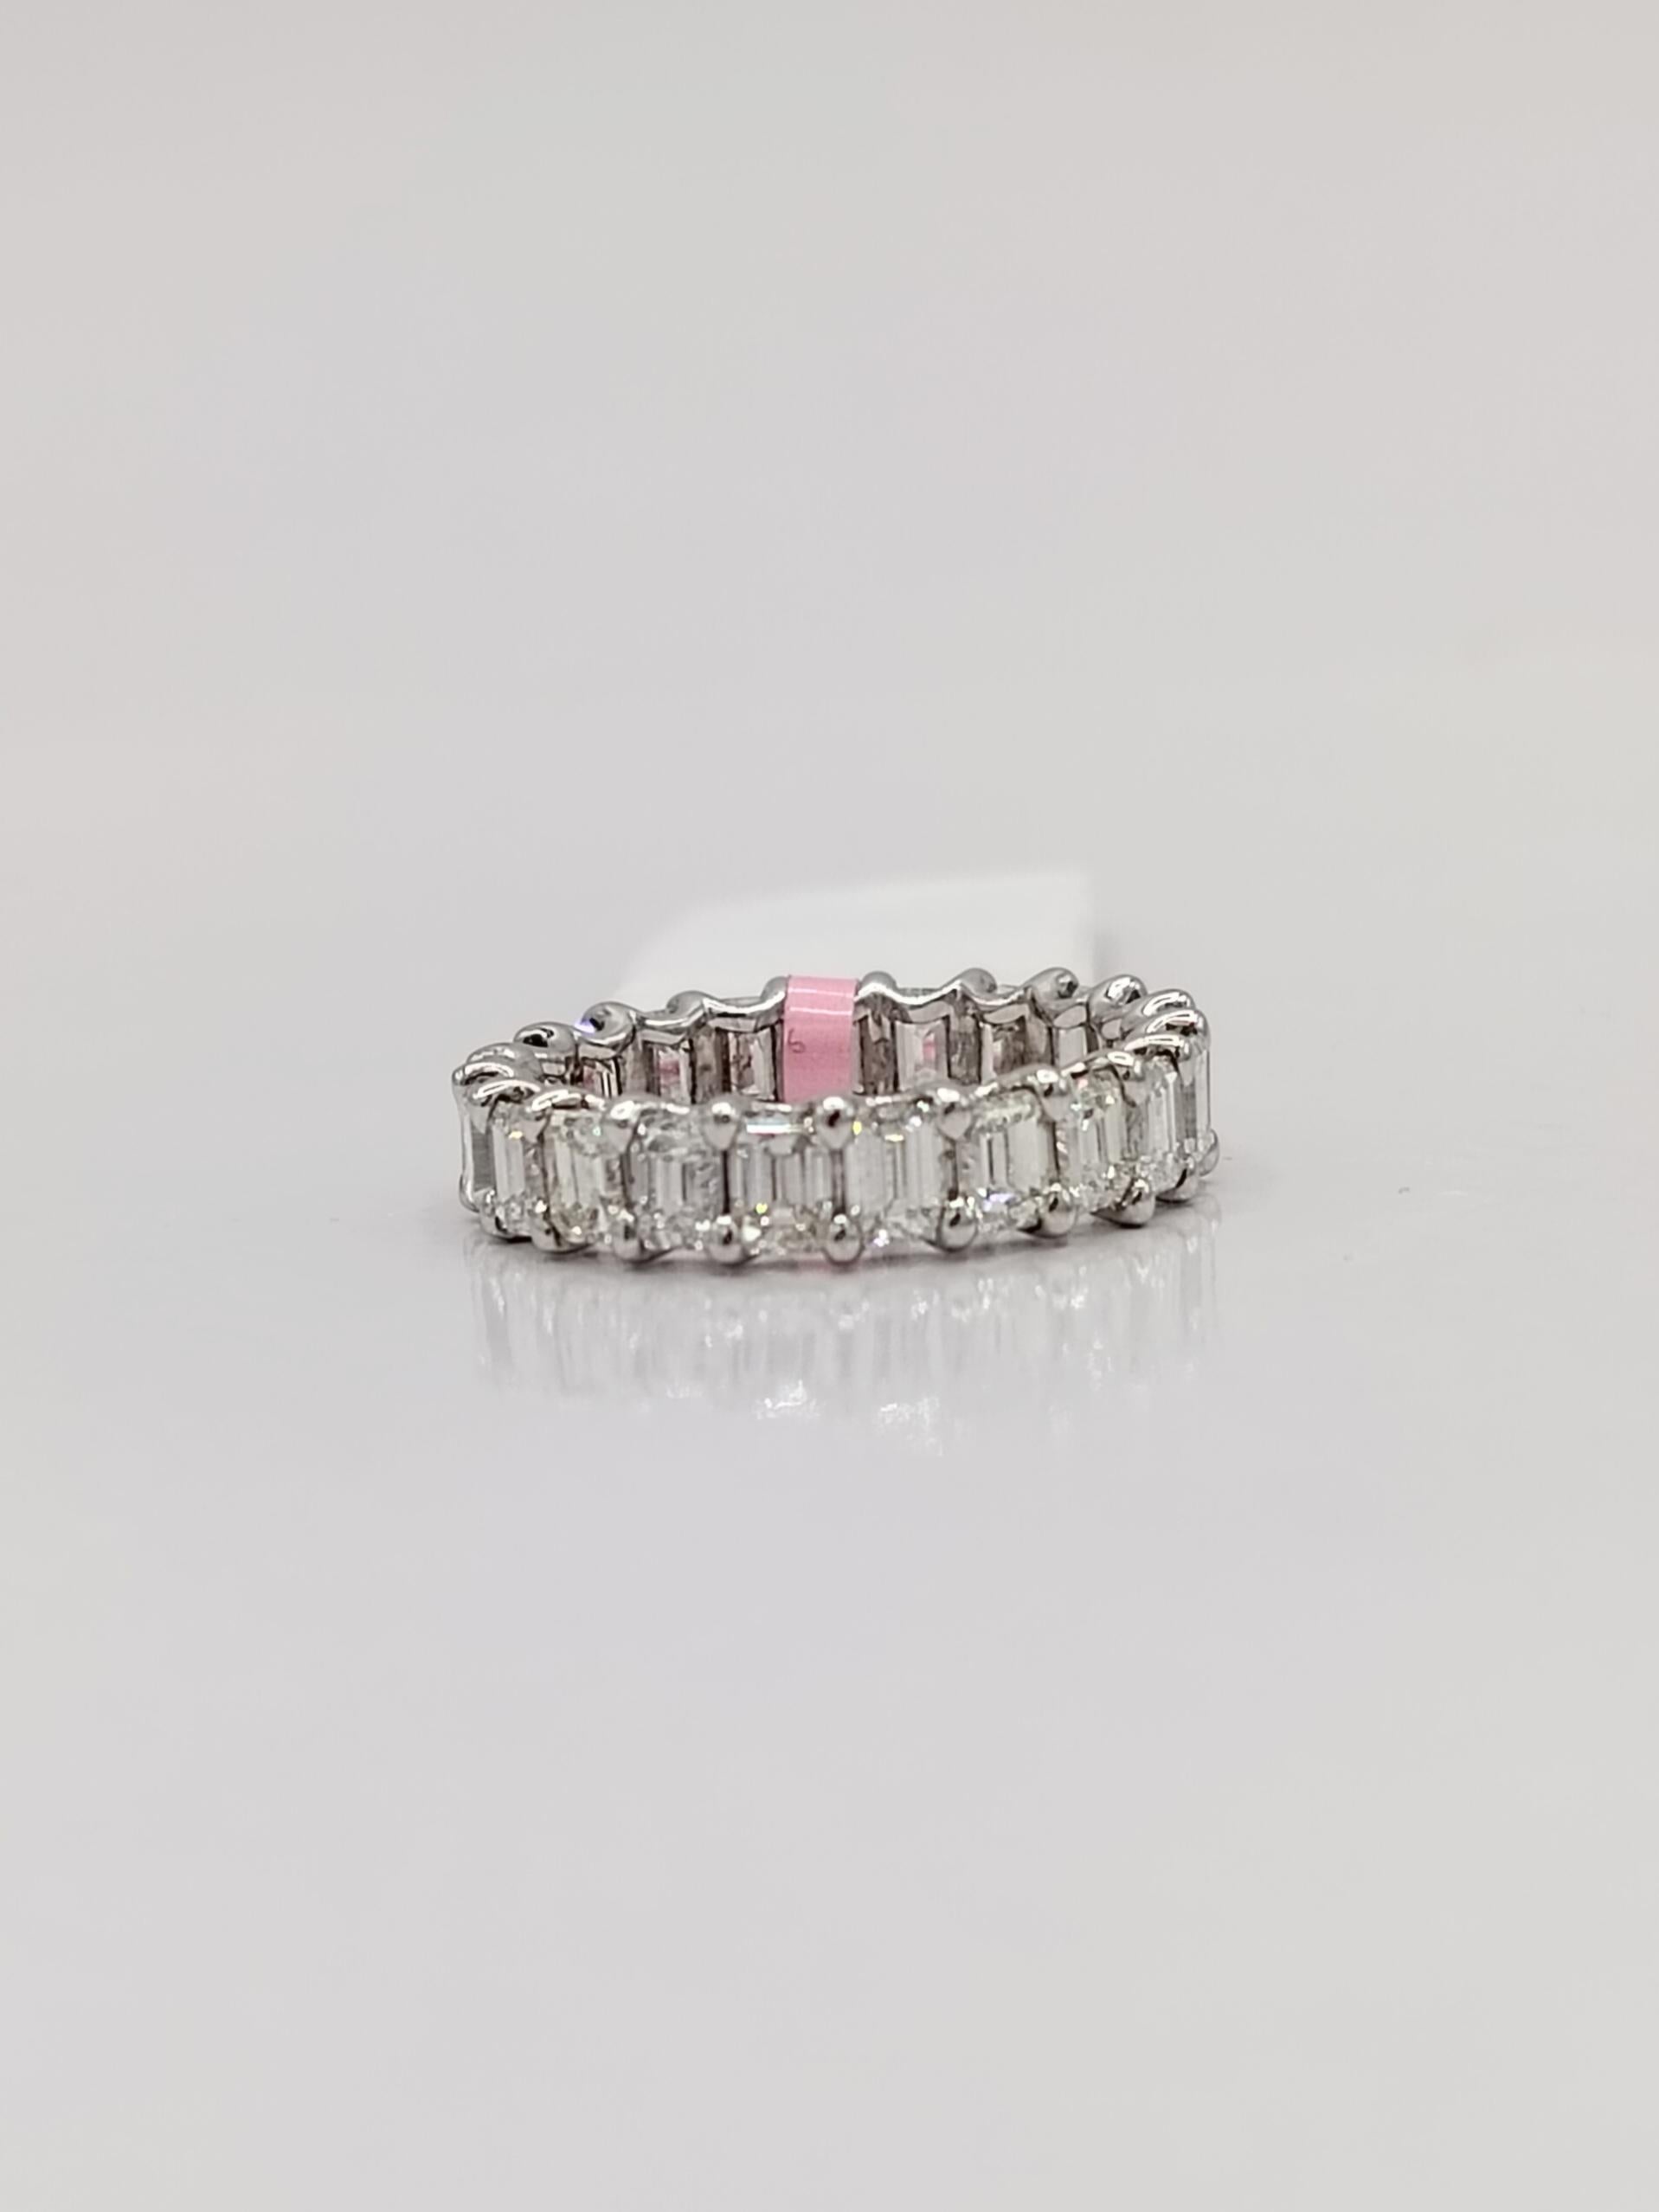 White Diamond Emerald Cut Eternity Band Ring in 18K White Gold For Sale 2